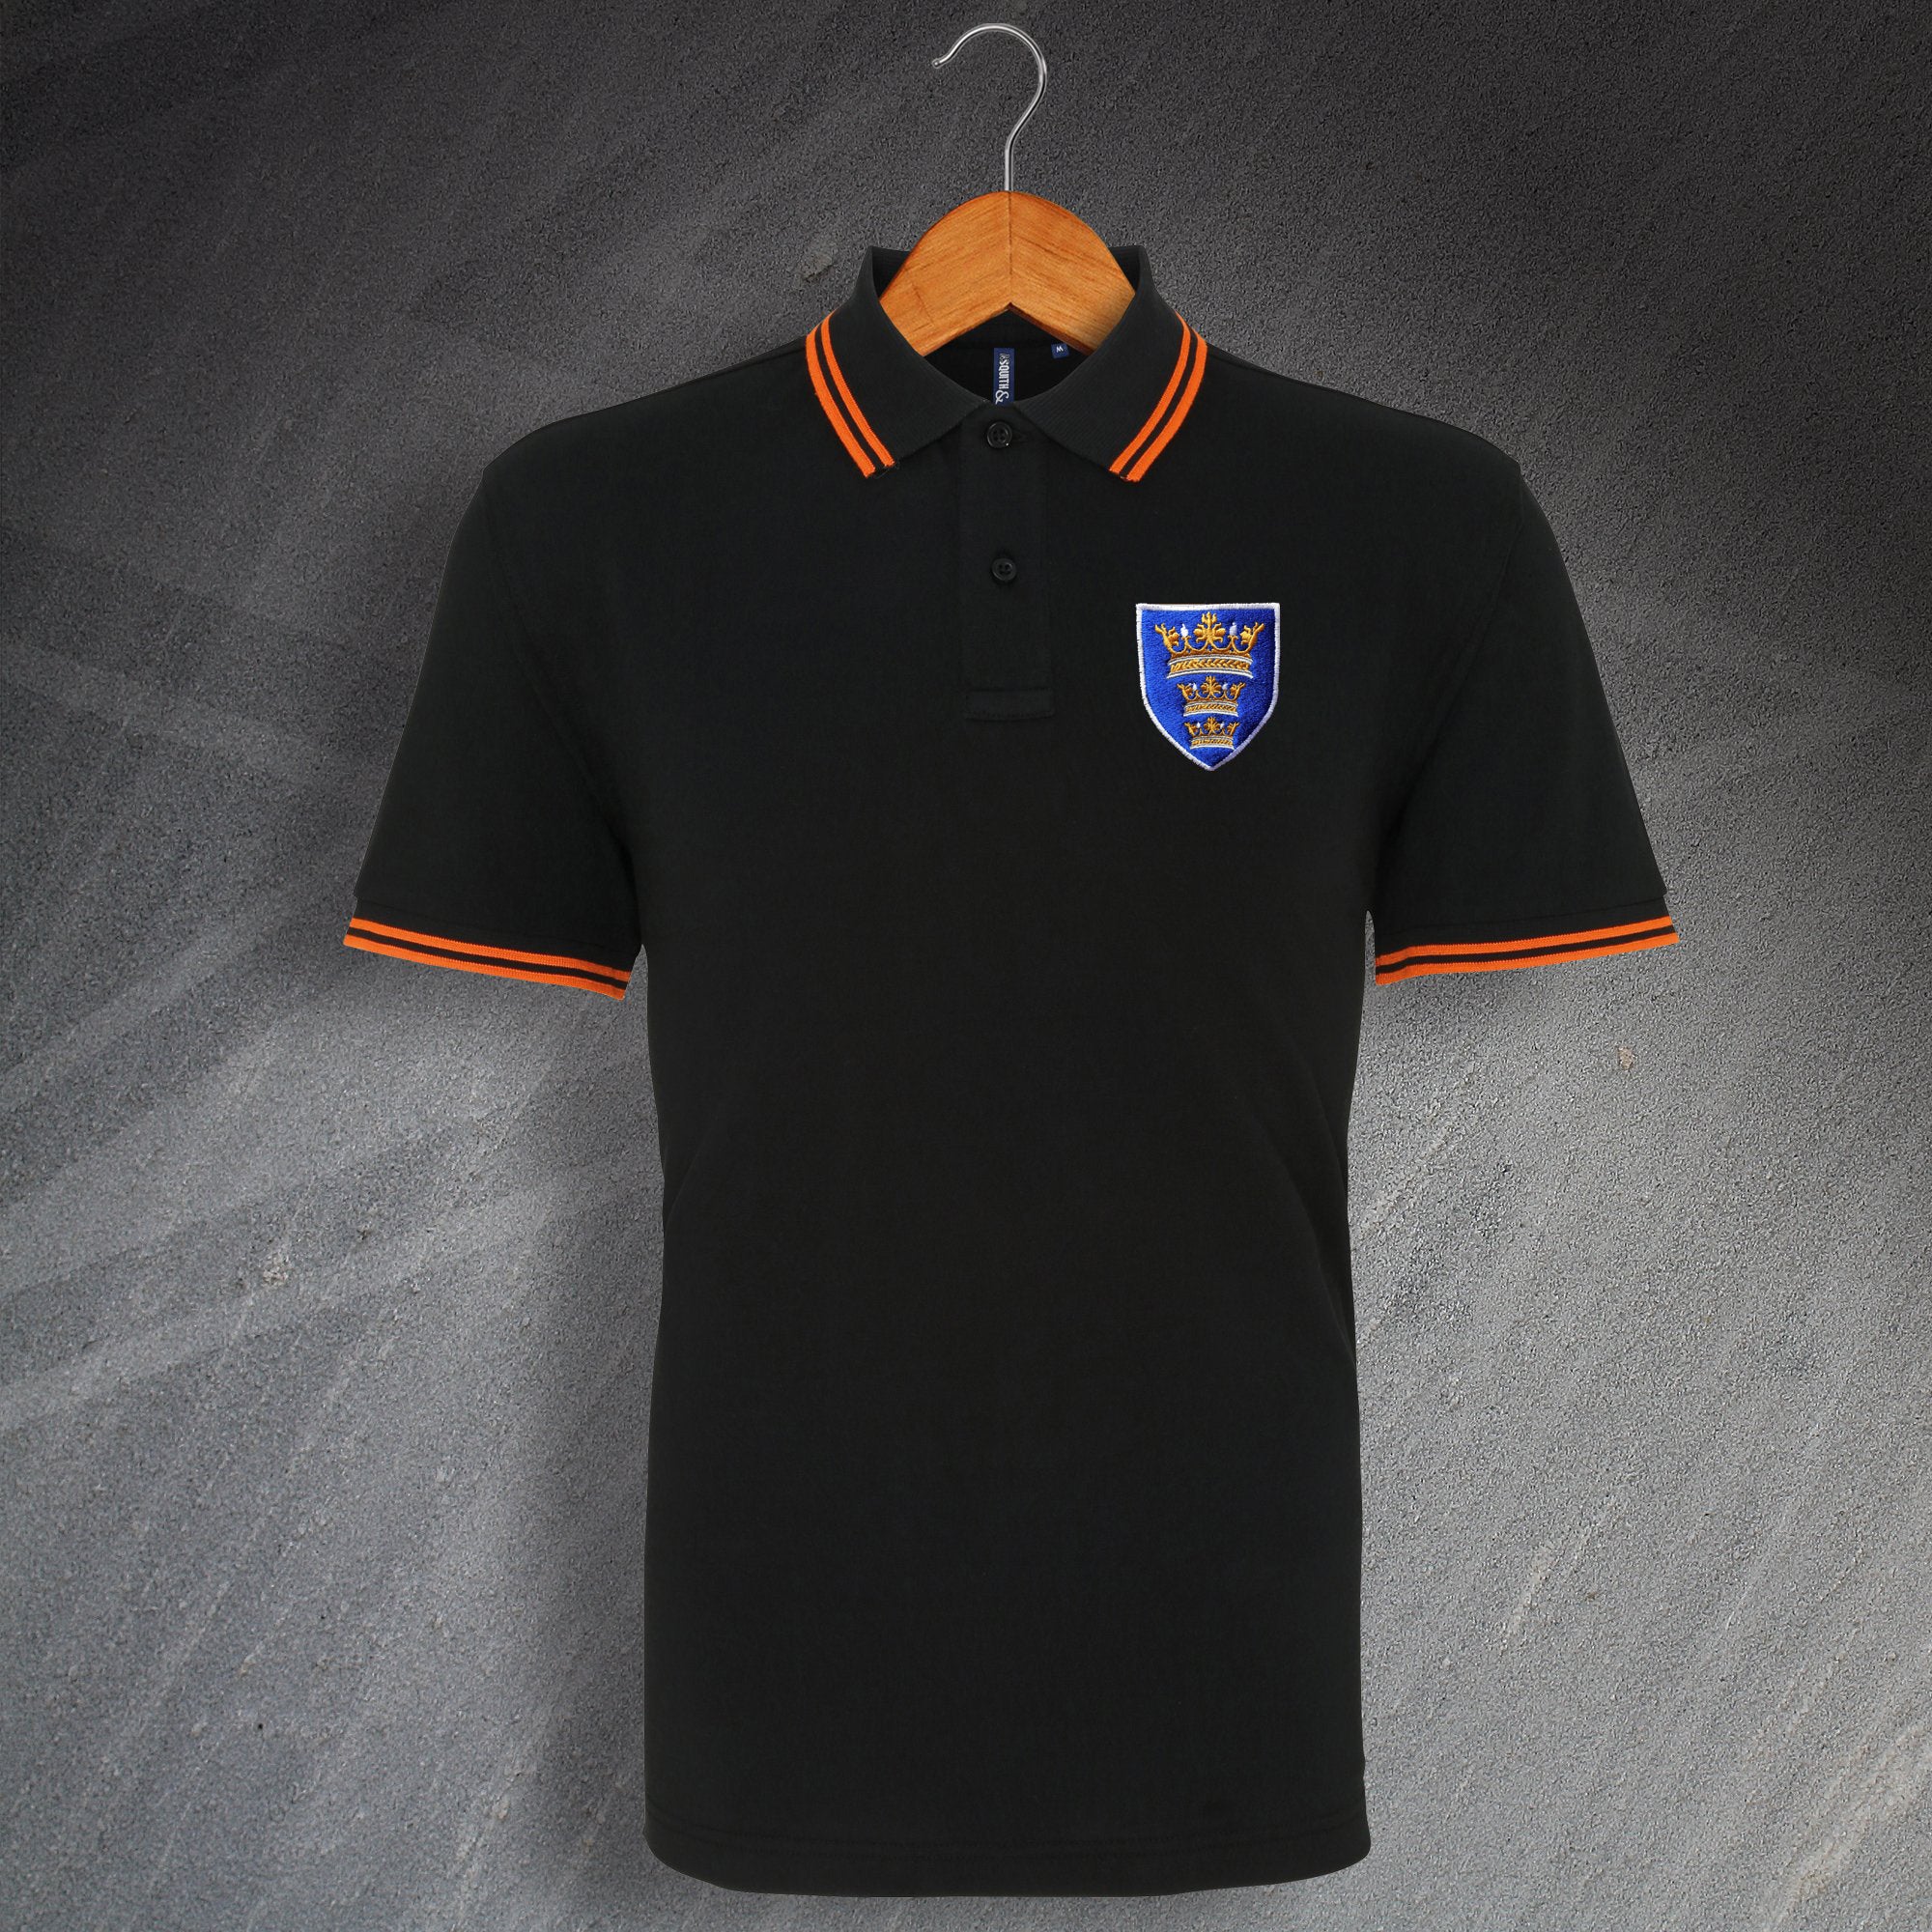 Hull Retro Polo Shirt | Retro Embroidered Hull Jerseys for Sale ...